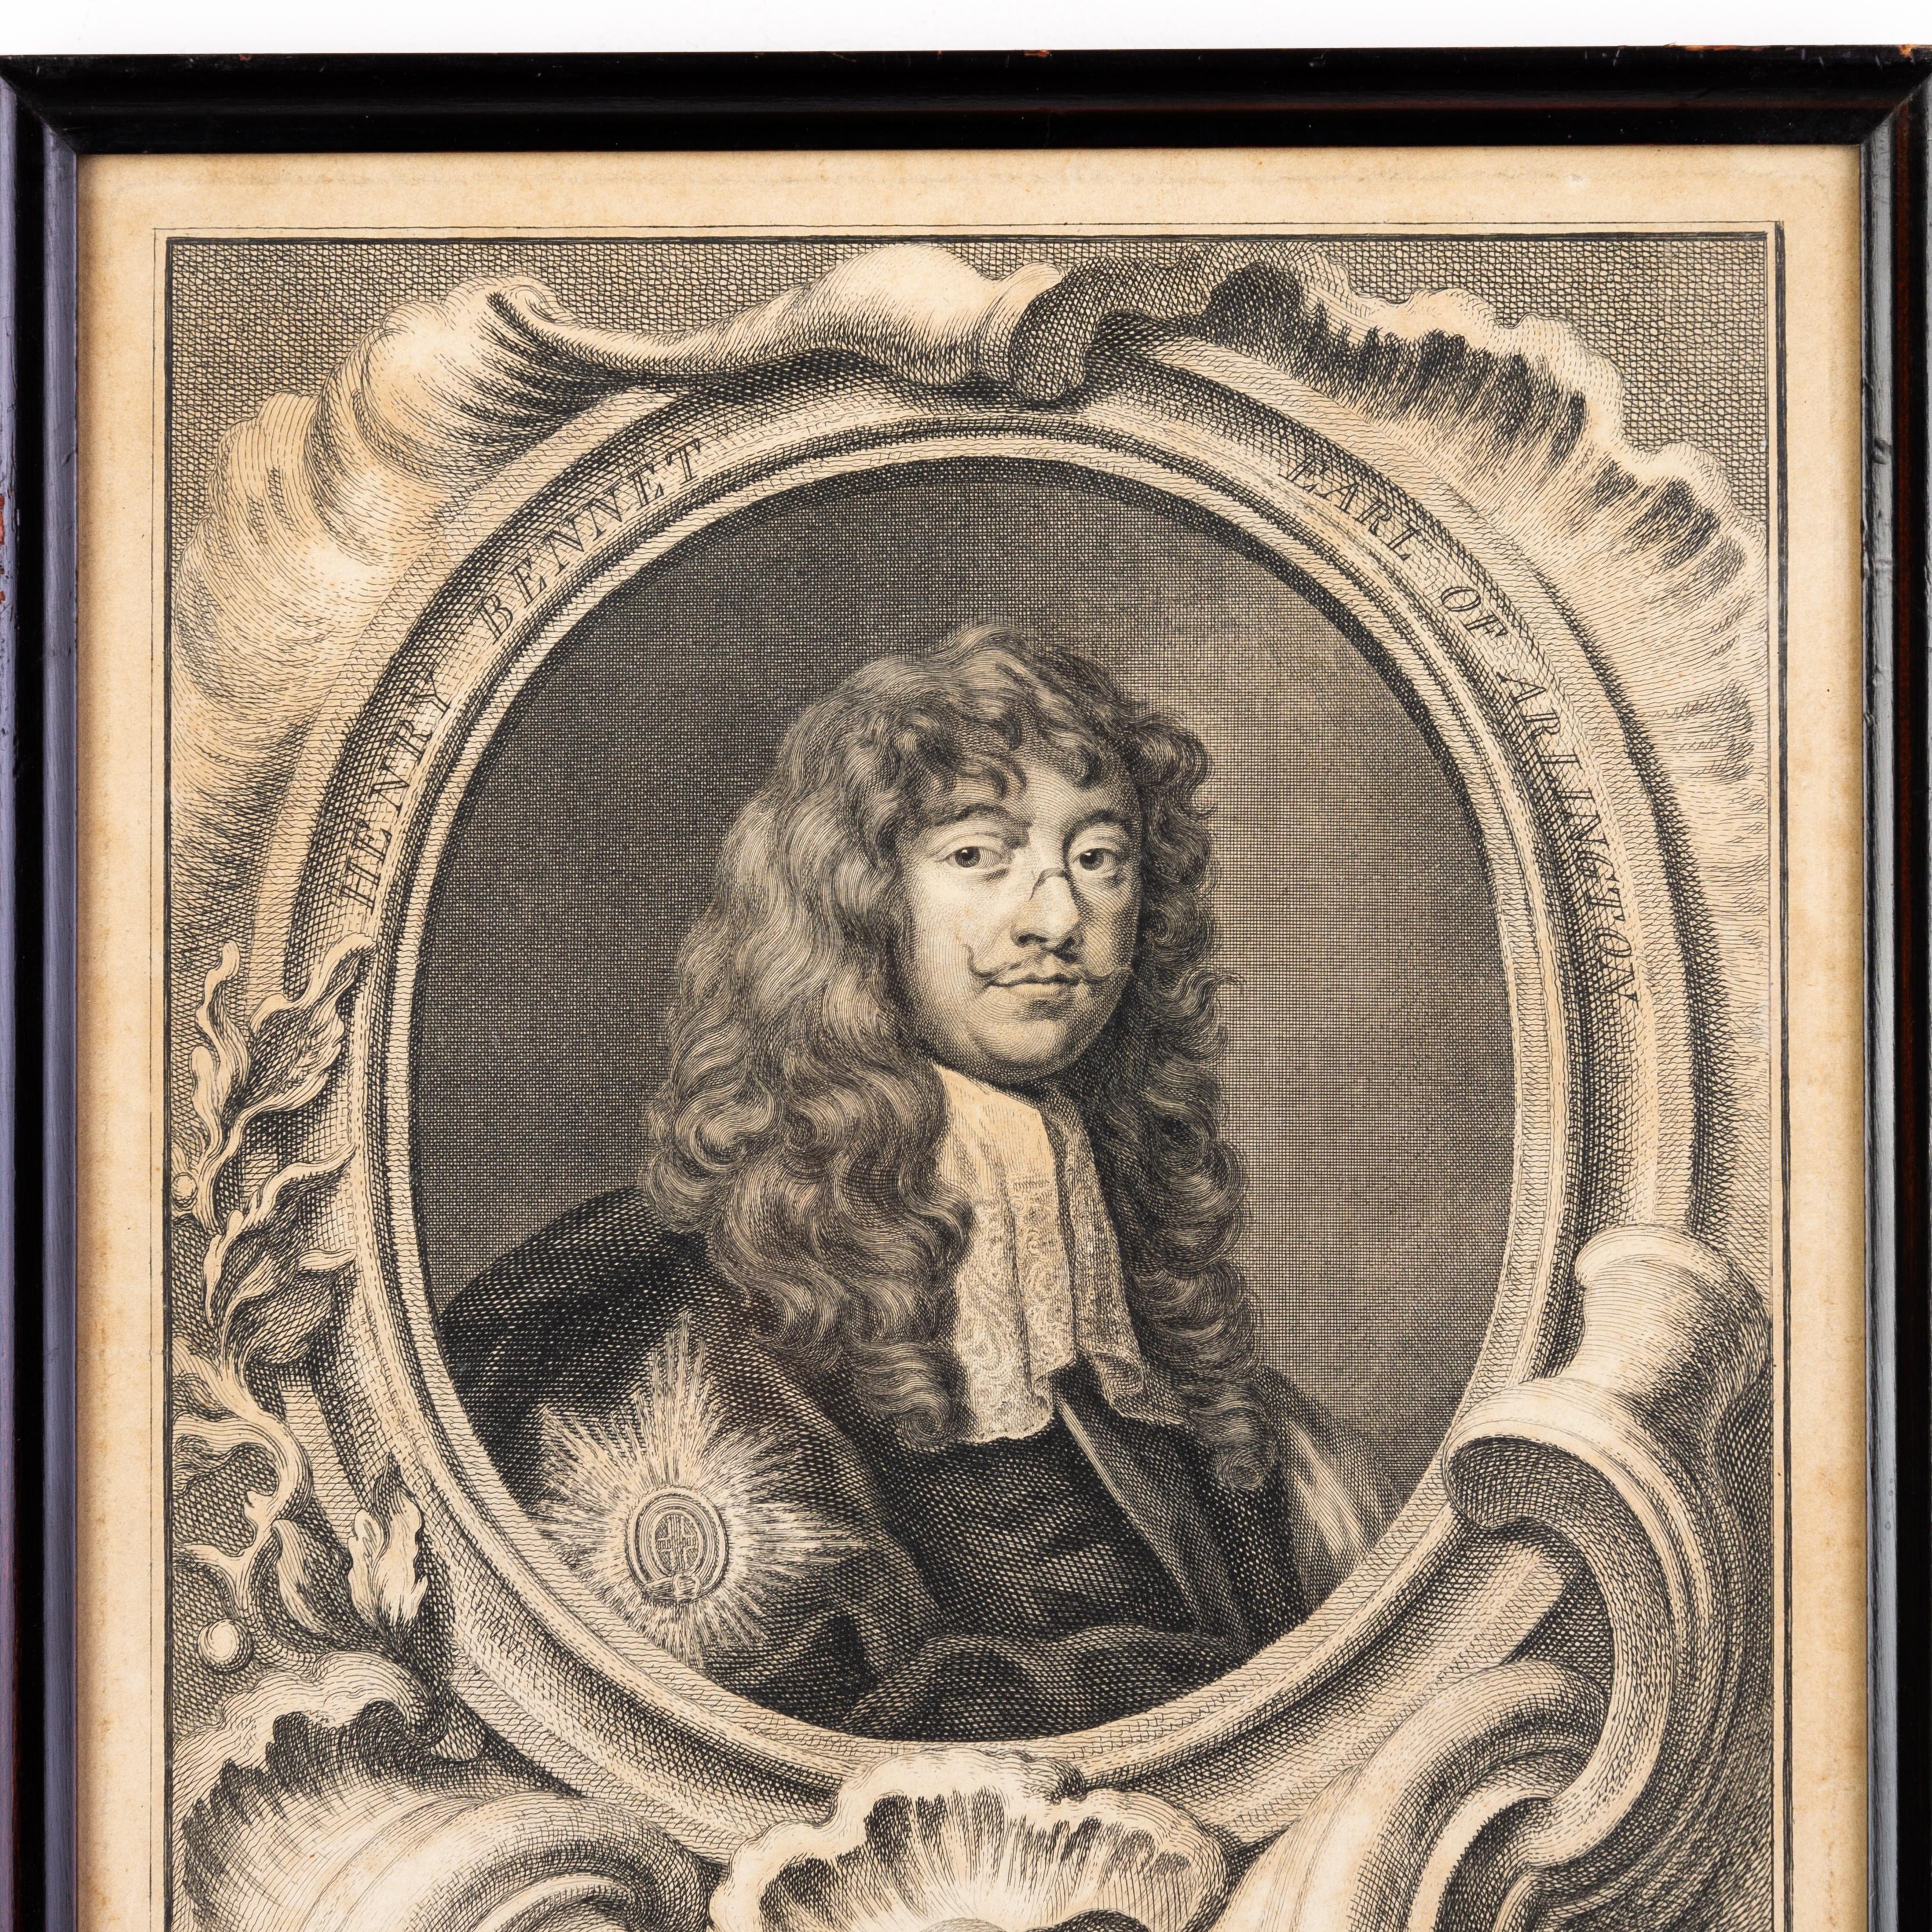 Henry Bennet Earl of Arlington Portrait Engraving 18th Century 
From a private English collection
Free international shipping

